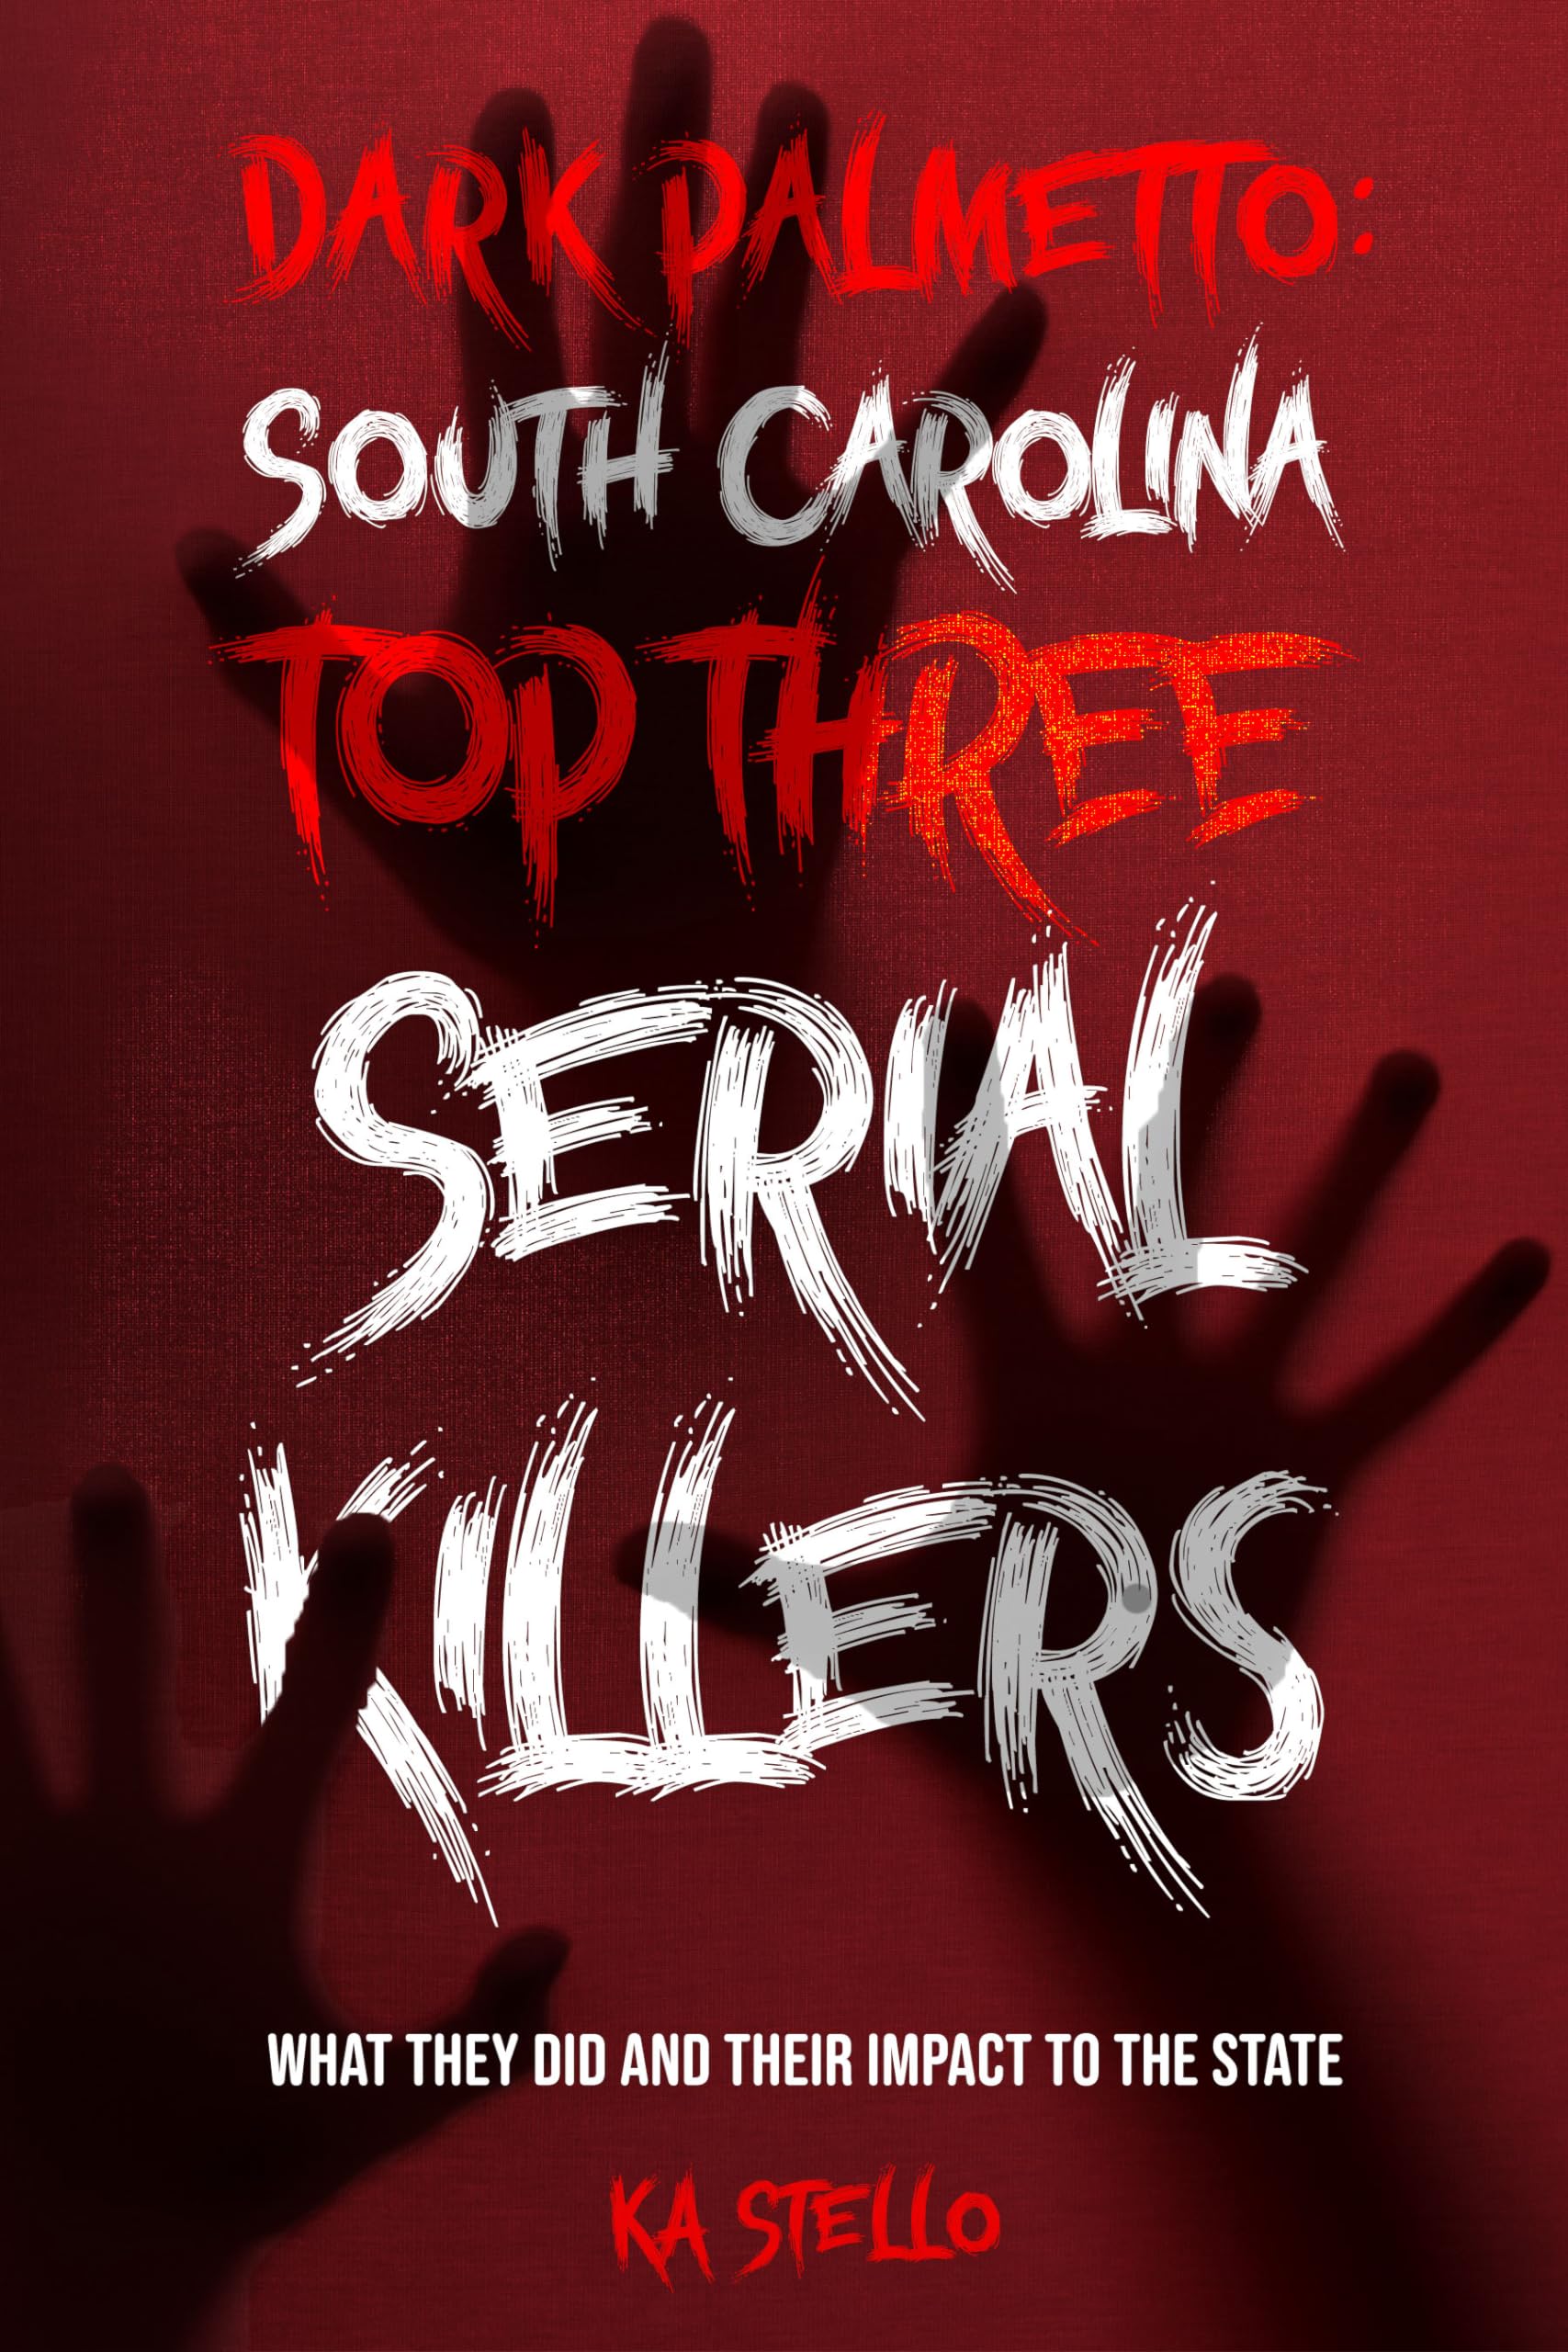 Dark Palmetto: South Carolina's Top Three Serial Killers: What They Did and The Impact to the State